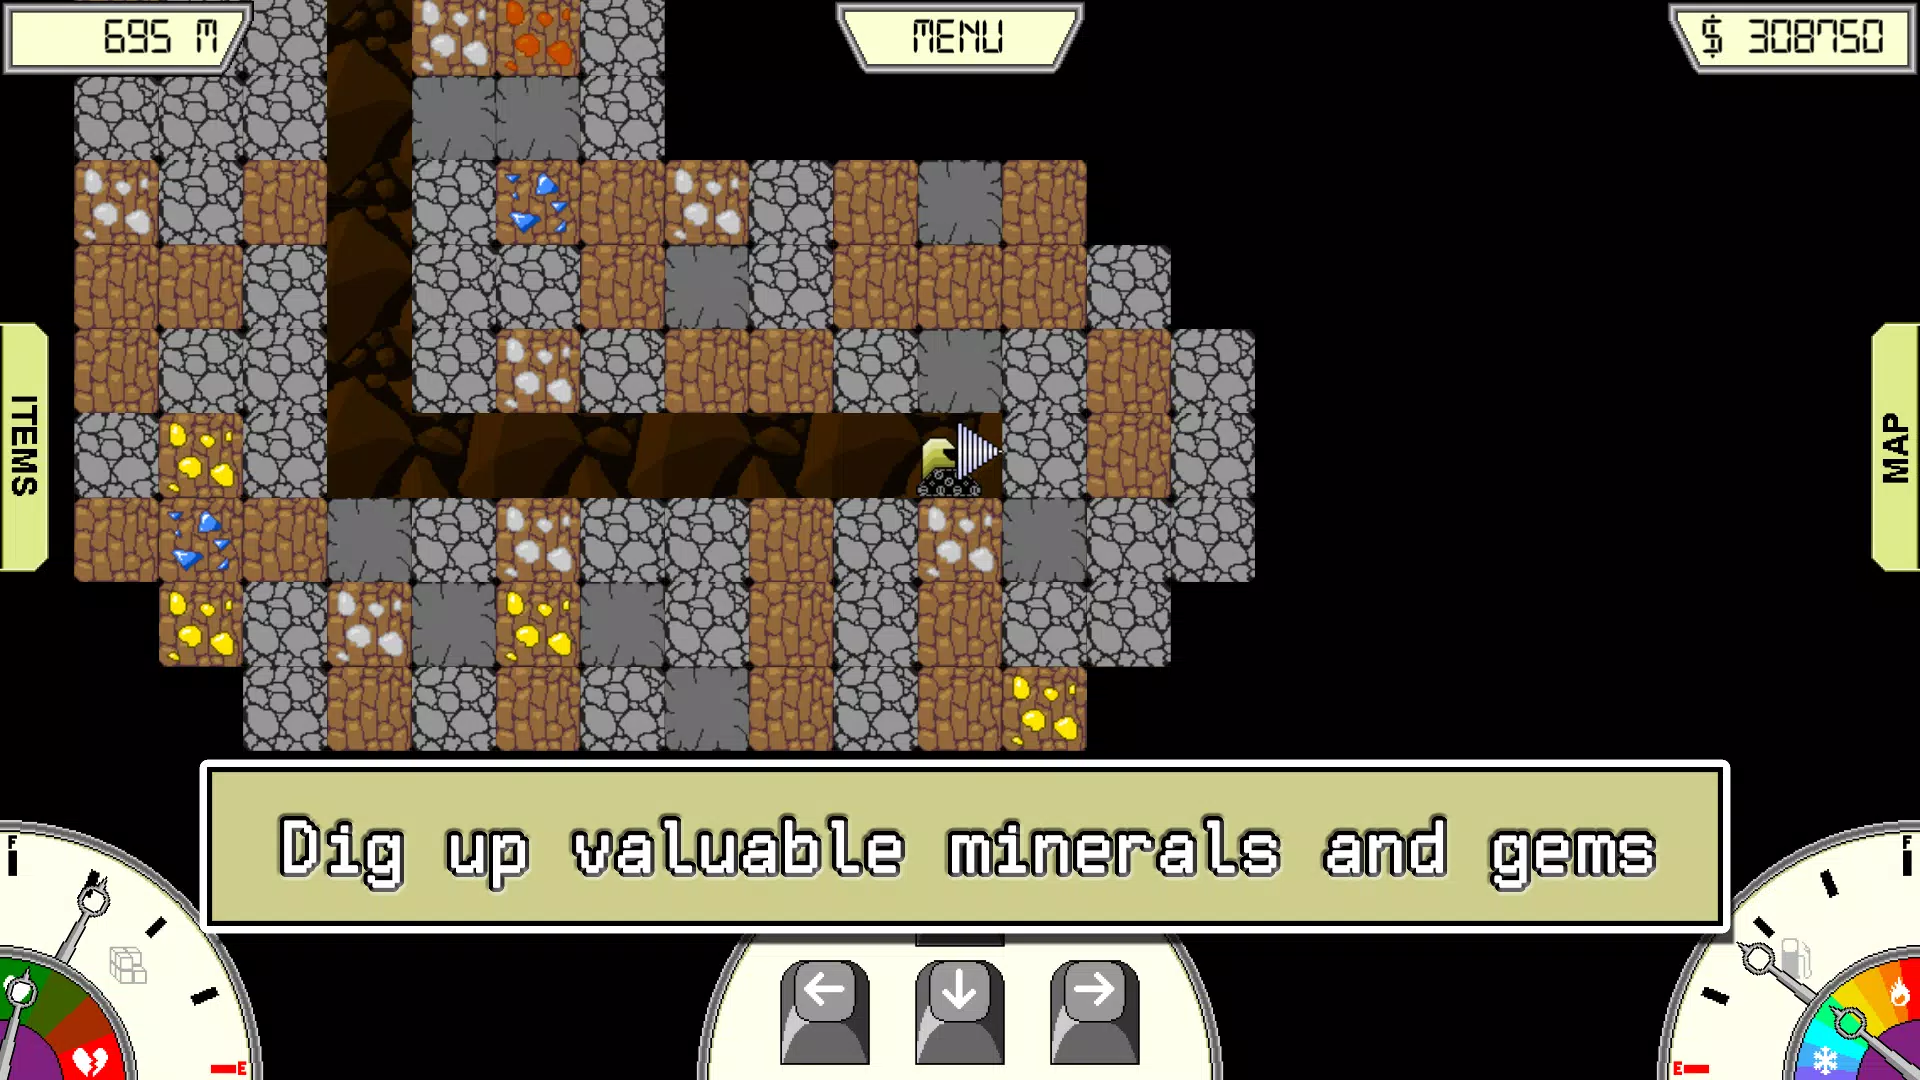 Mining Games Free::Appstore for Android